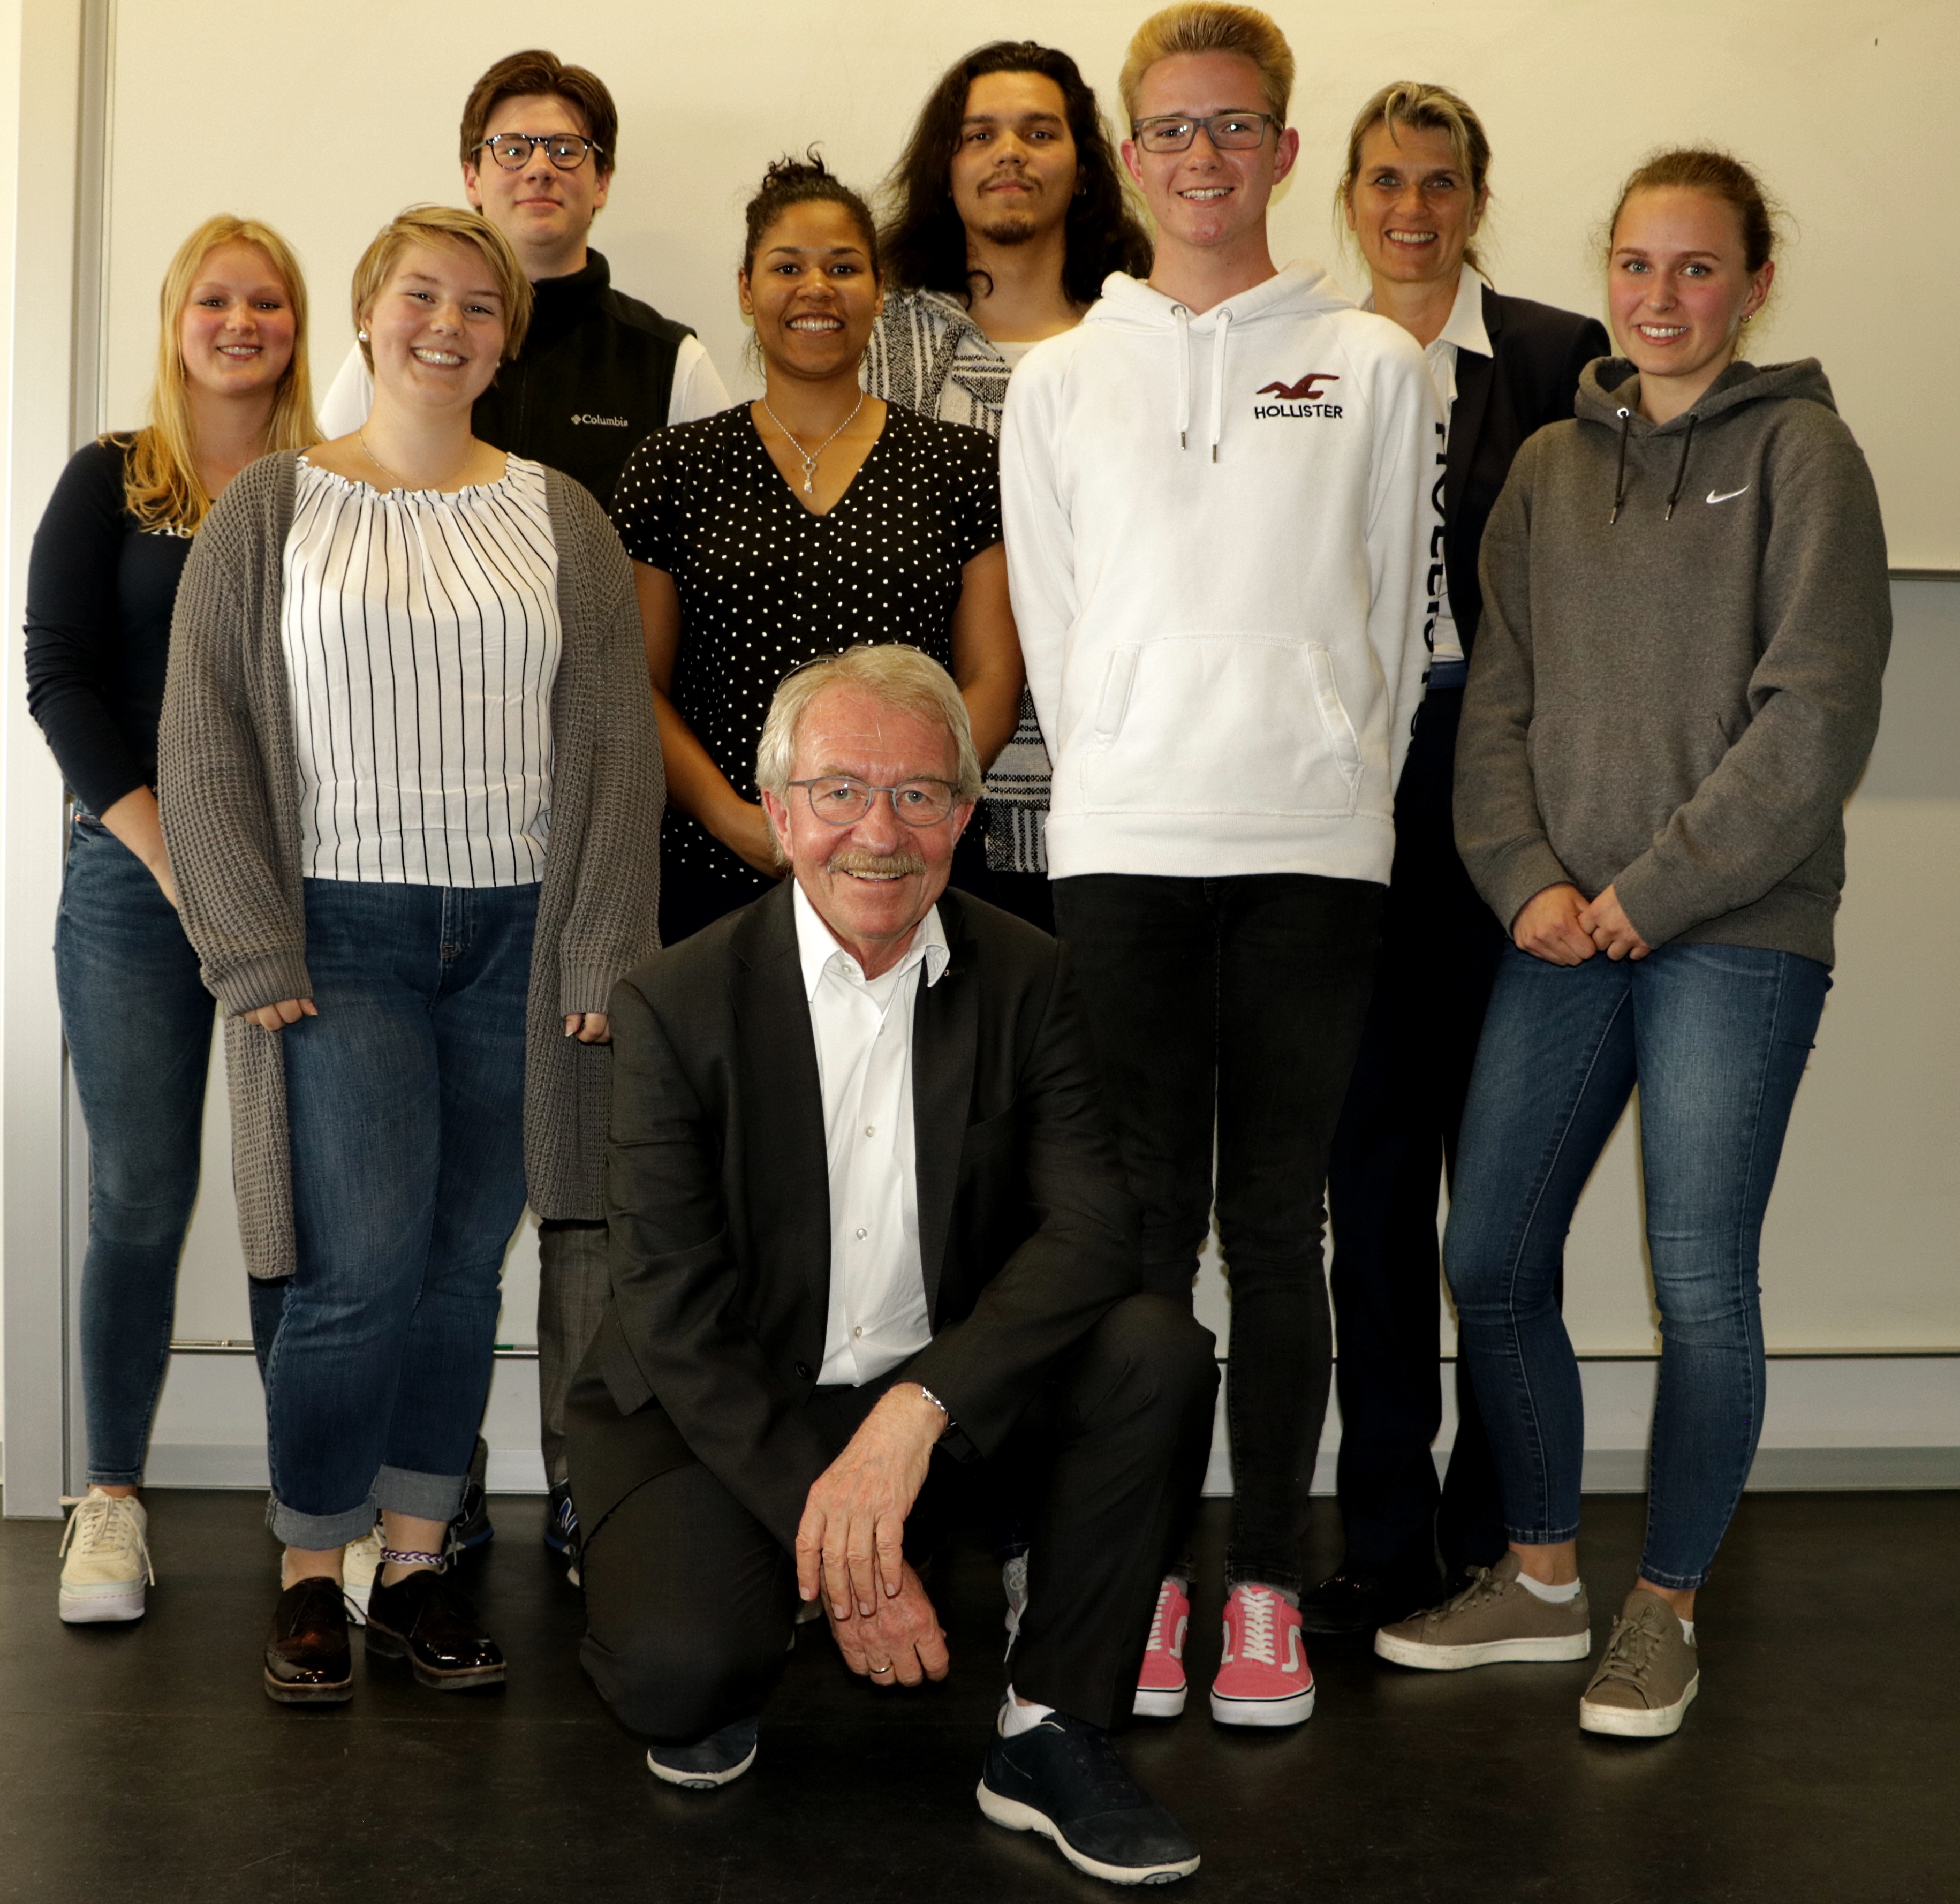 Prof. Reinhard Büchl surrounded by students